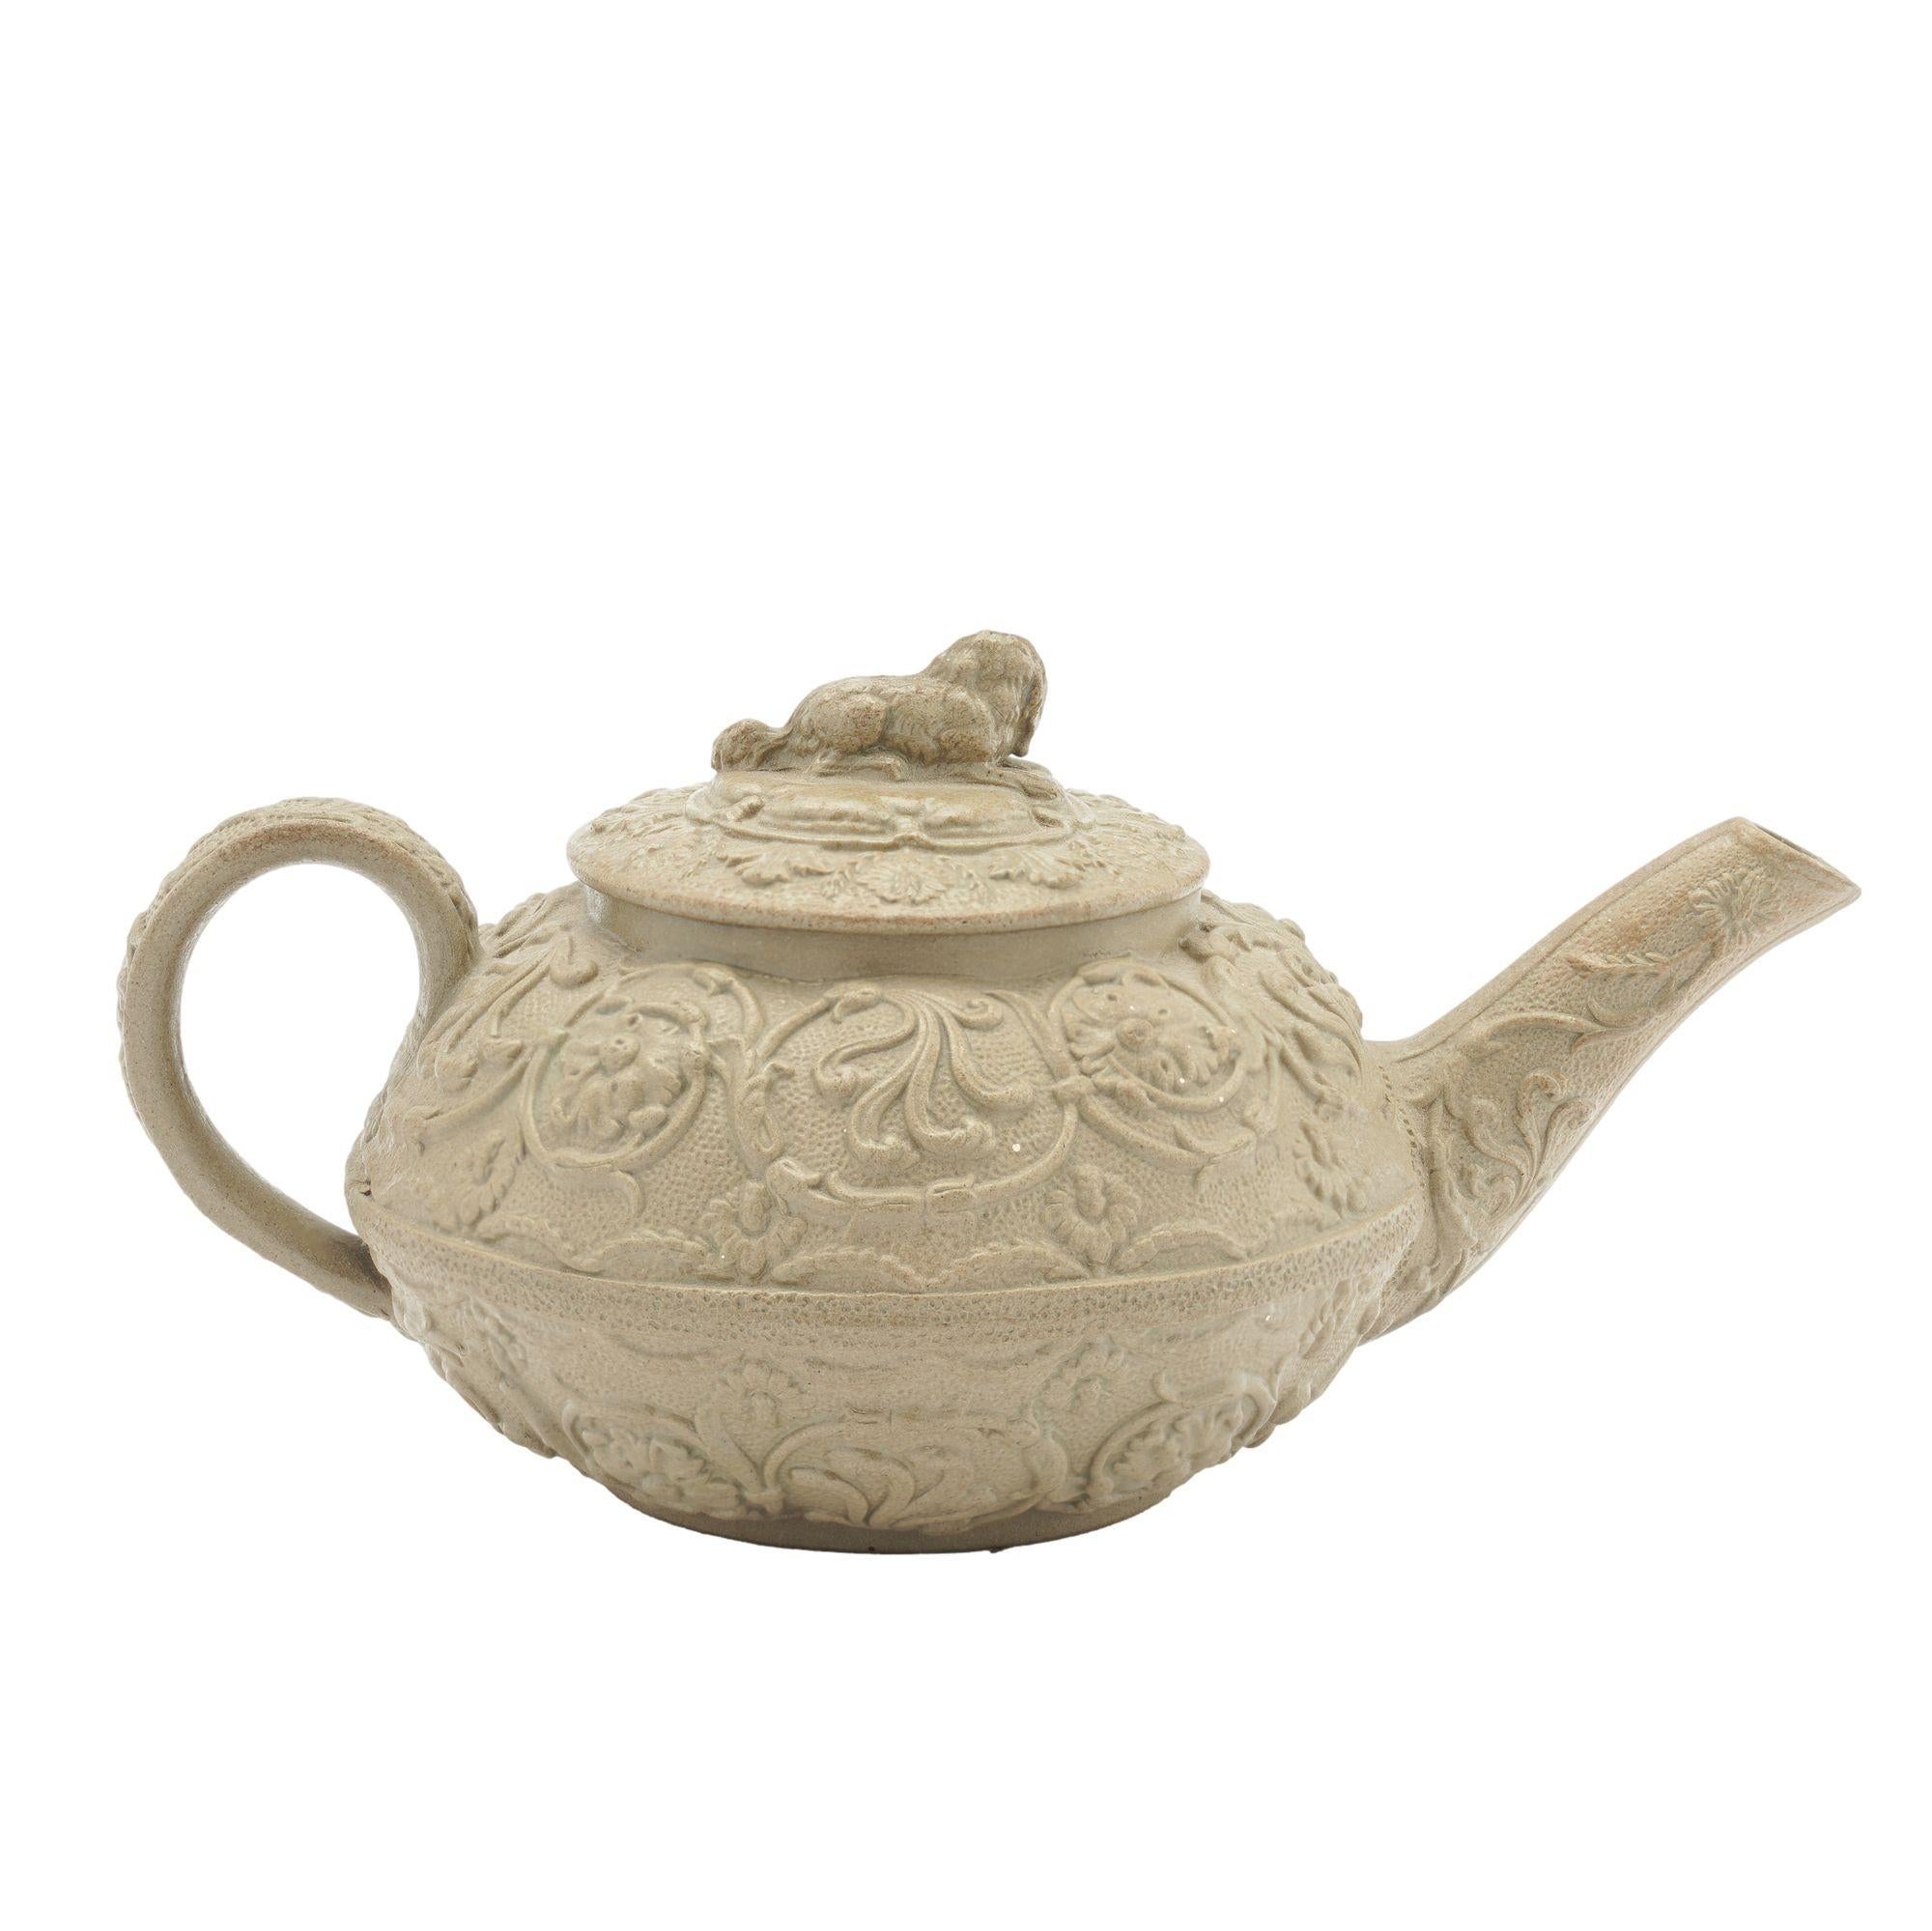 19th Century Stoneware tea pot with spaniel lid finial by Wedgwood, c. 1829 For Sale